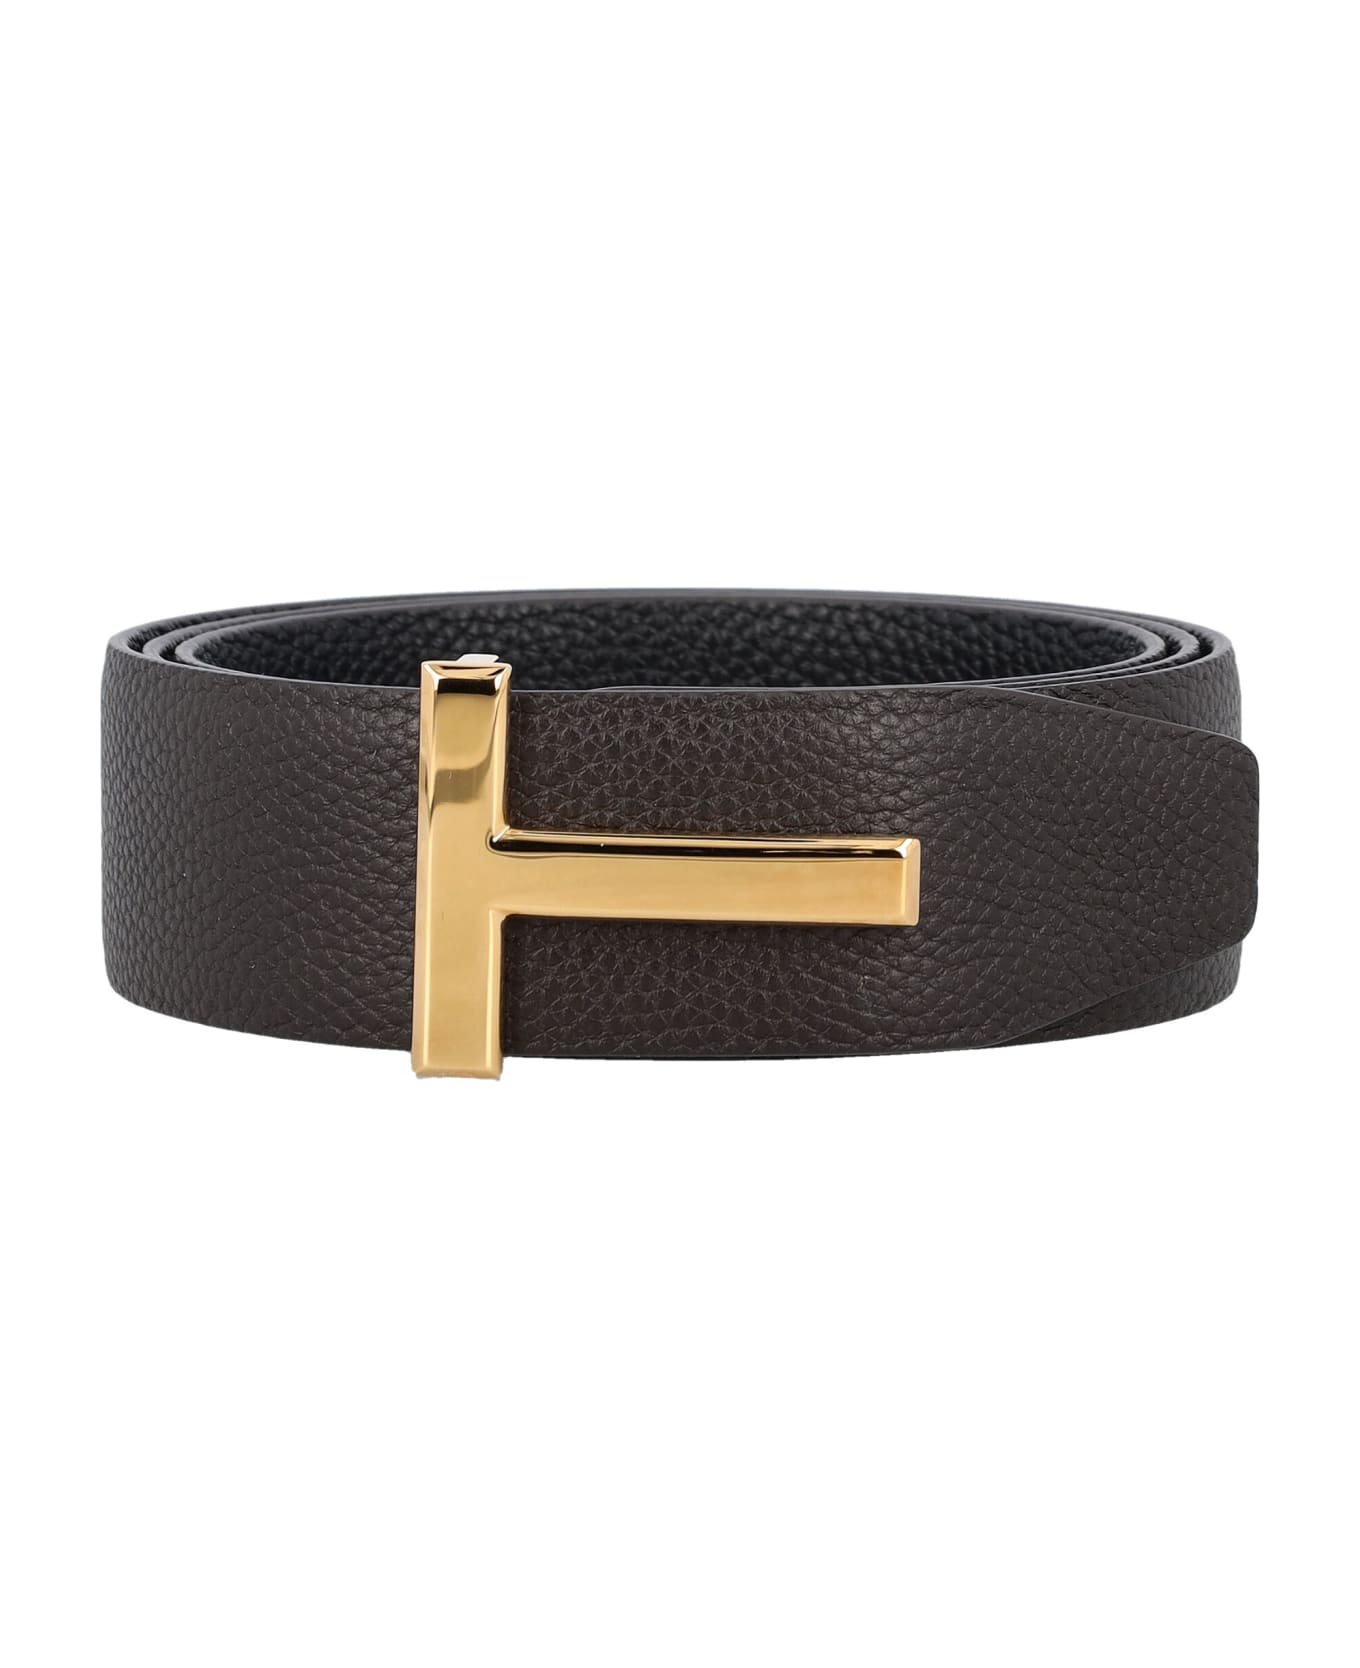 Tom Ford Grain Leather Icon Belt - BROWN BLACK